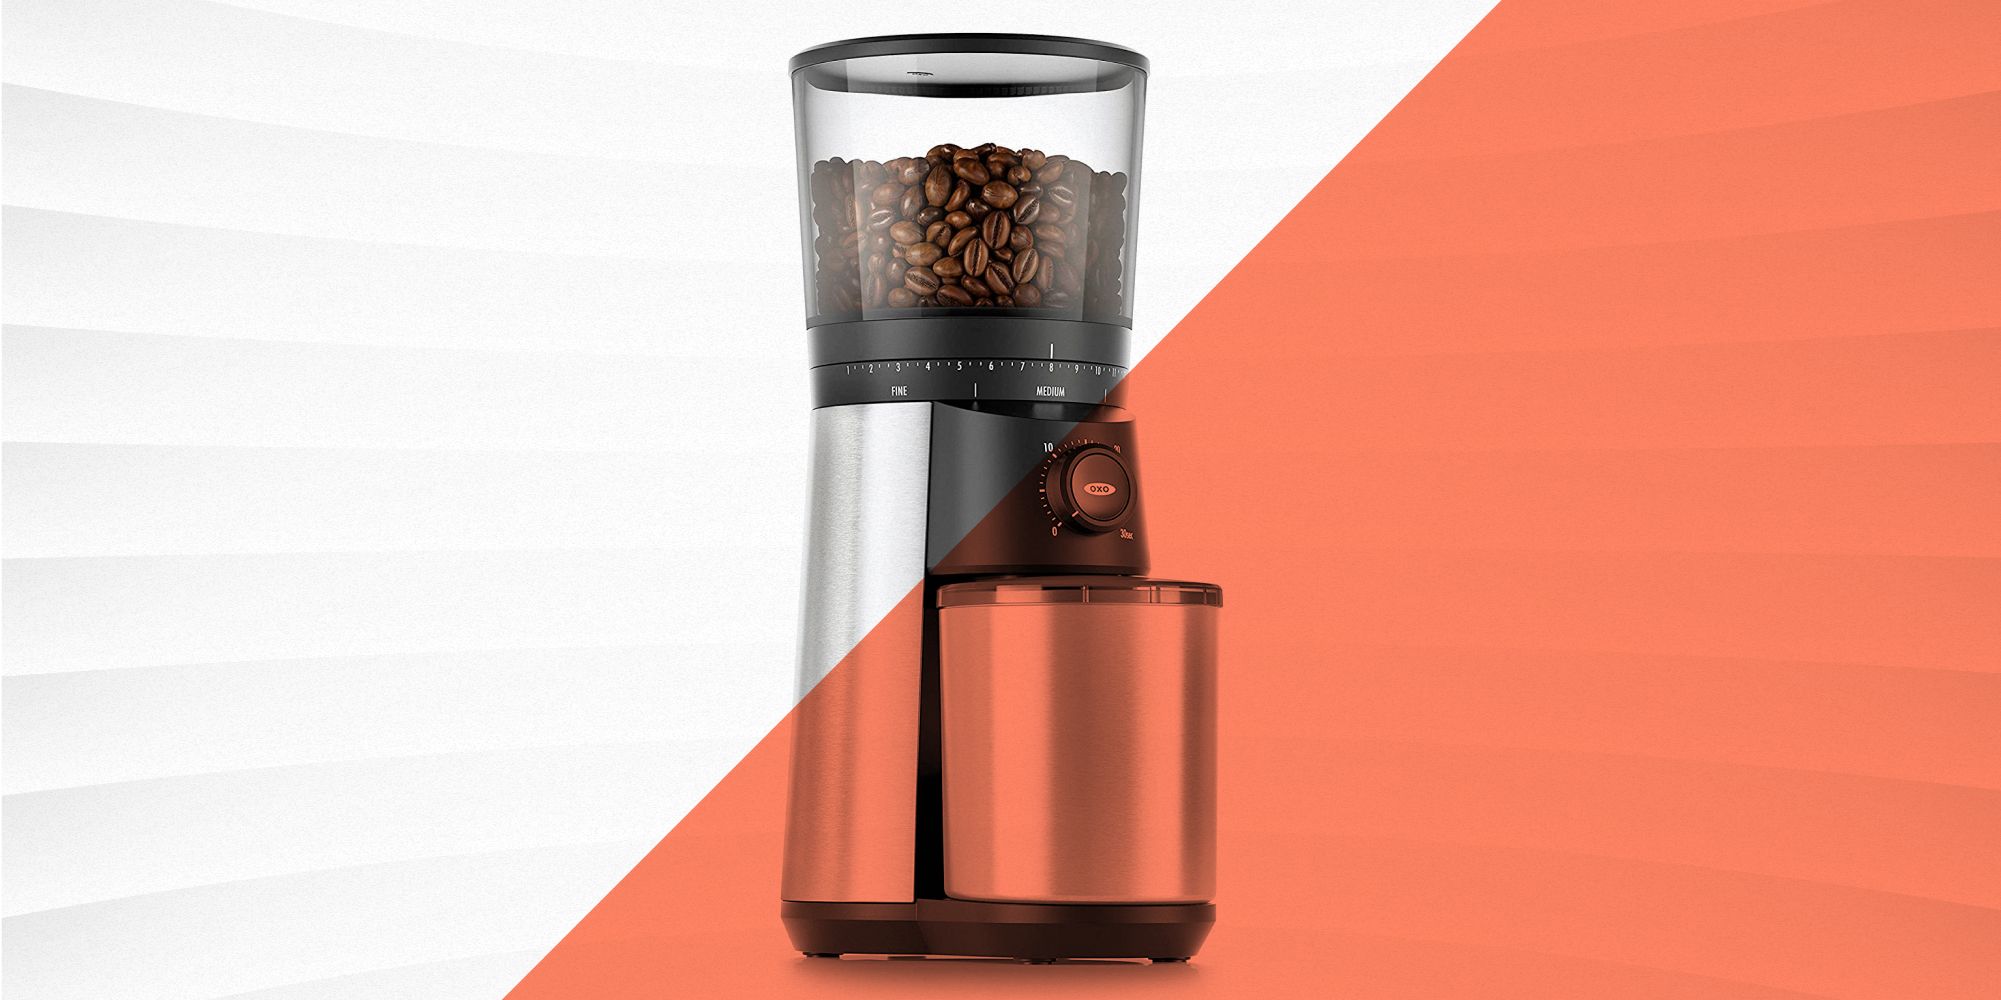 Coffee Grinder Stainless Steel Hand Coffee Grinder Manual Coffee Bean Grinder Spices Grains Nuts Brewing Grinders for Office Home